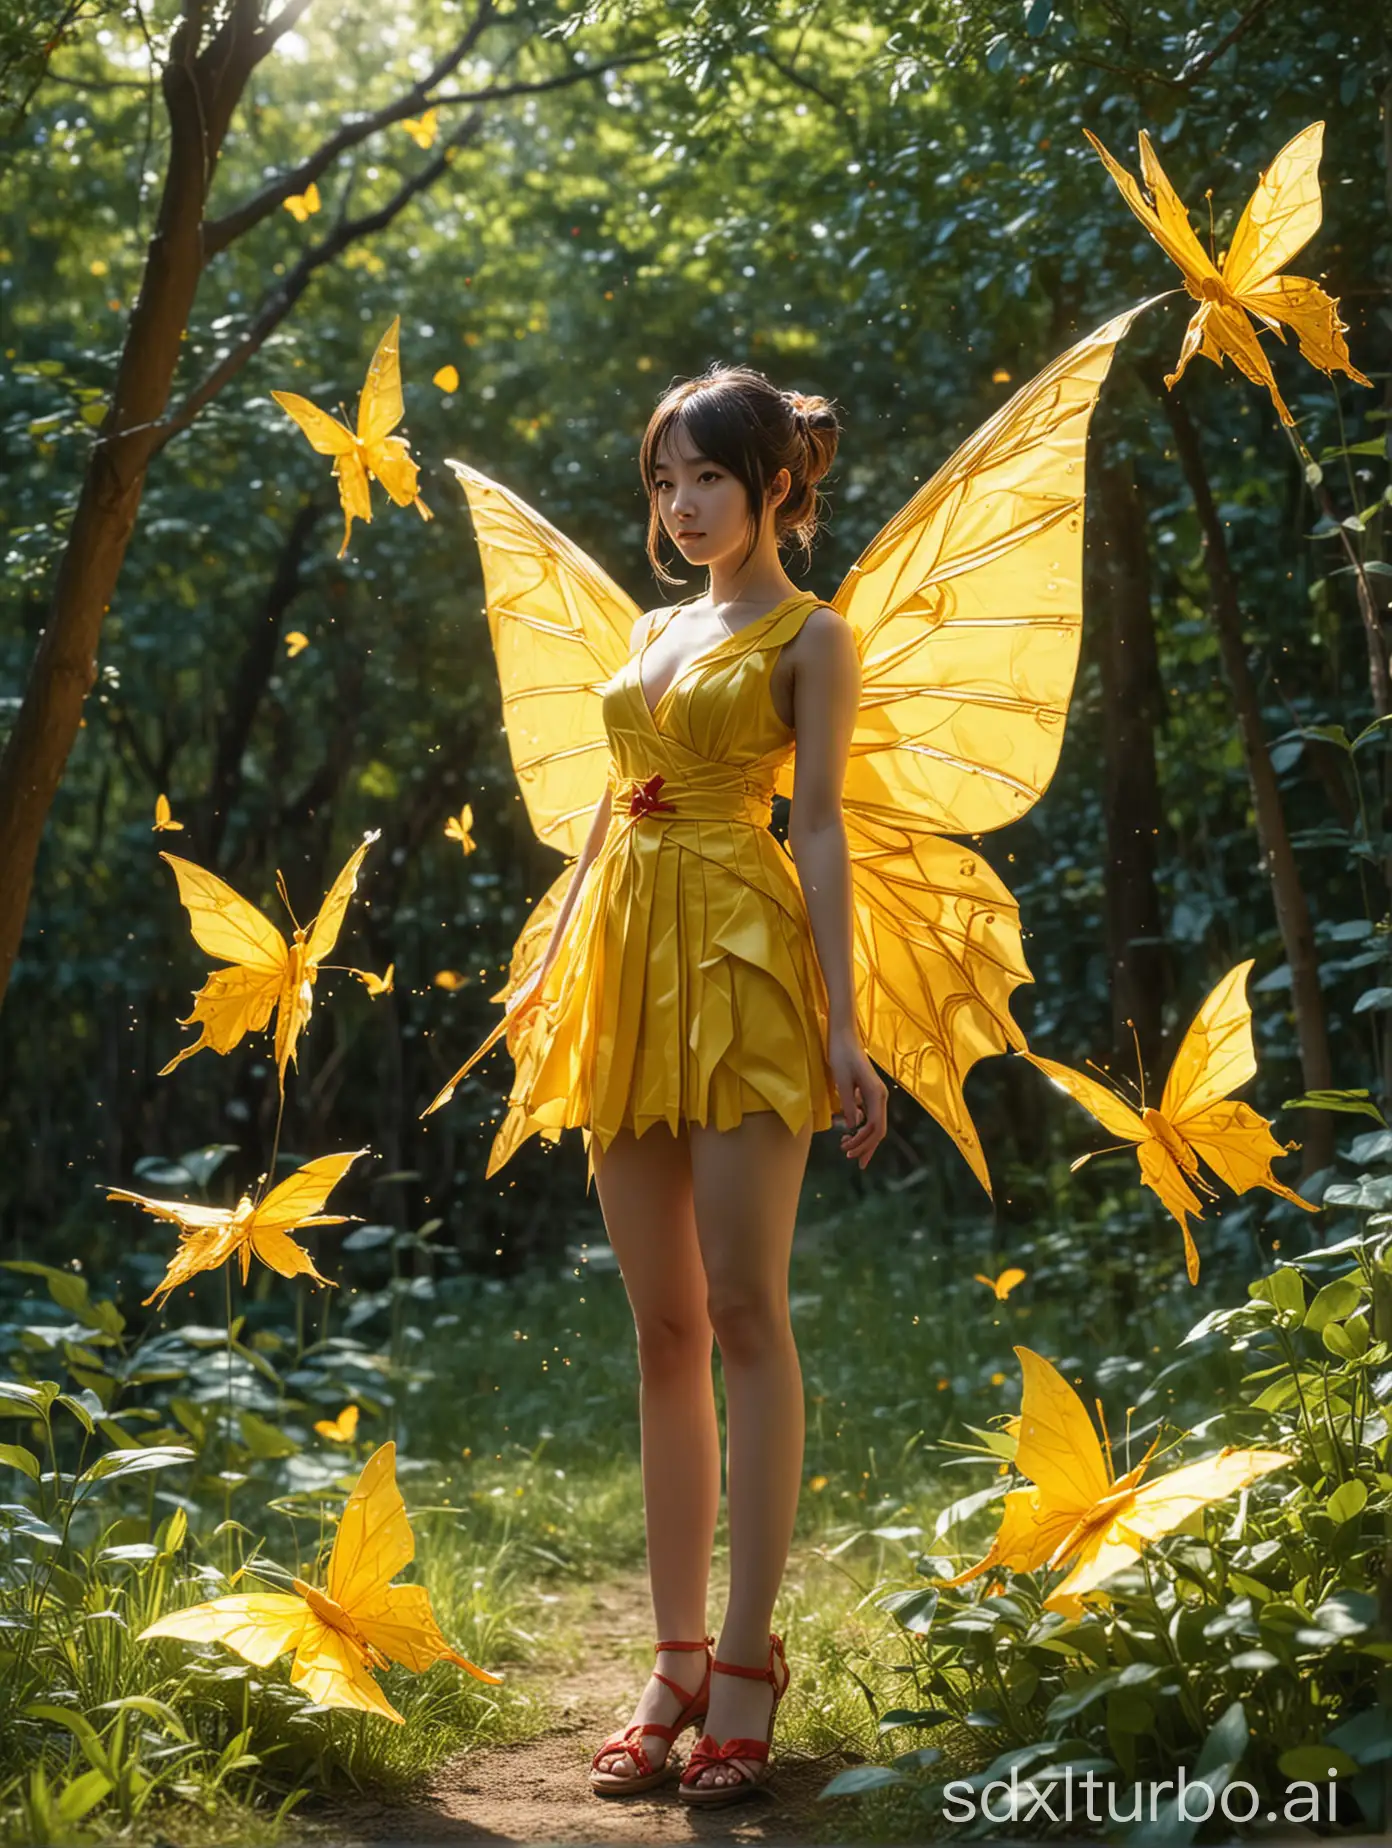 Enchanting-Glow-Glowing-Butterfly-Girl-Amidst-Natures-Beauty